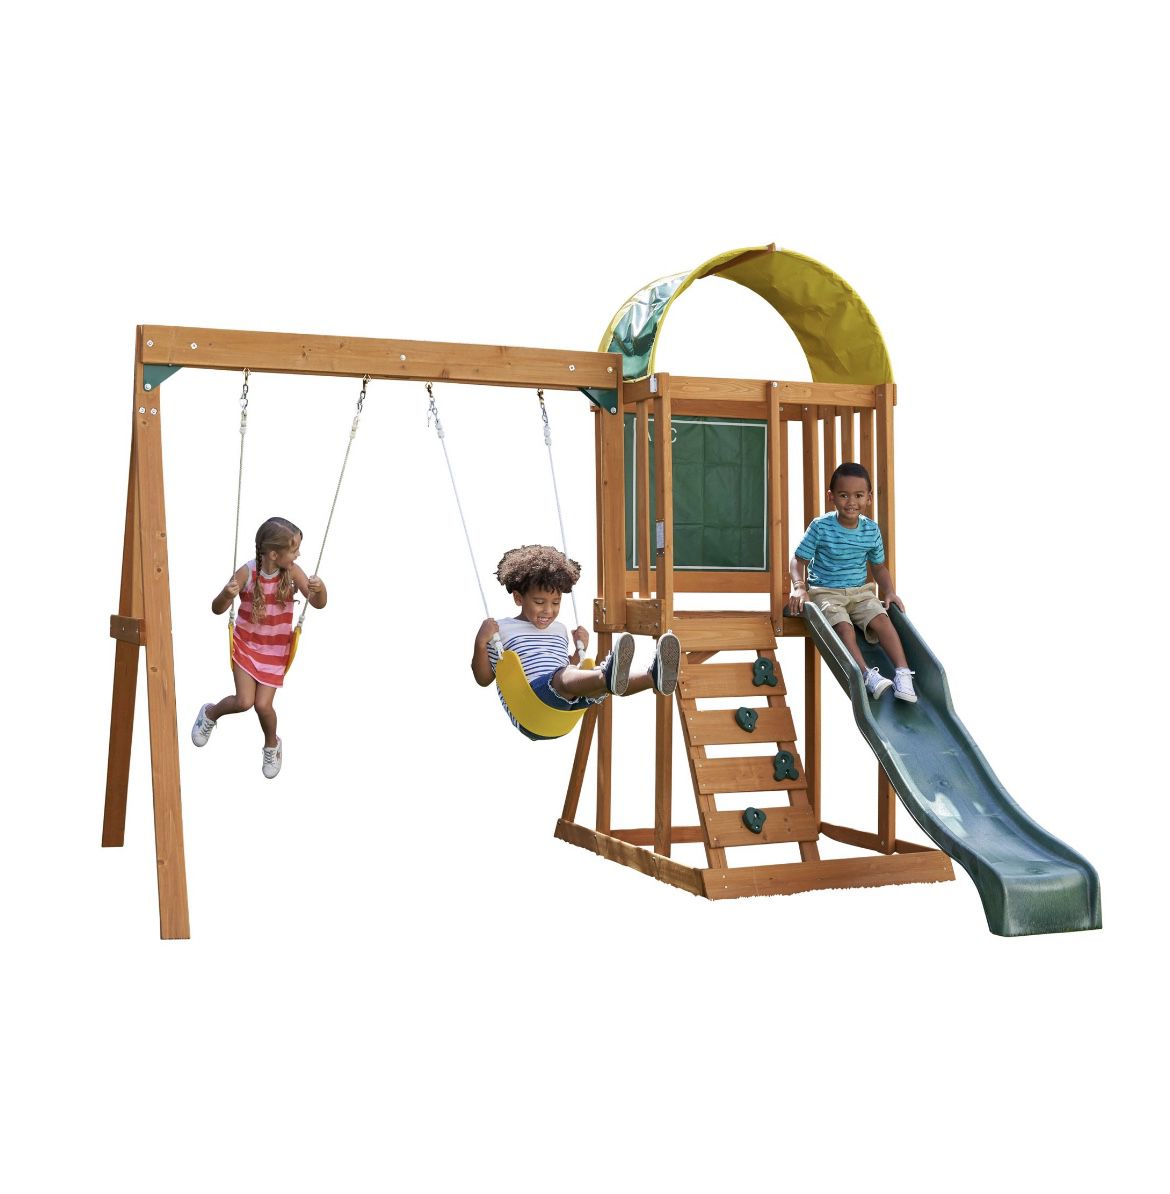 KidKraft Ainsley Wooden Outdoor Swing Set with Slide, Chalk Wall, Canopy and Rock Wall